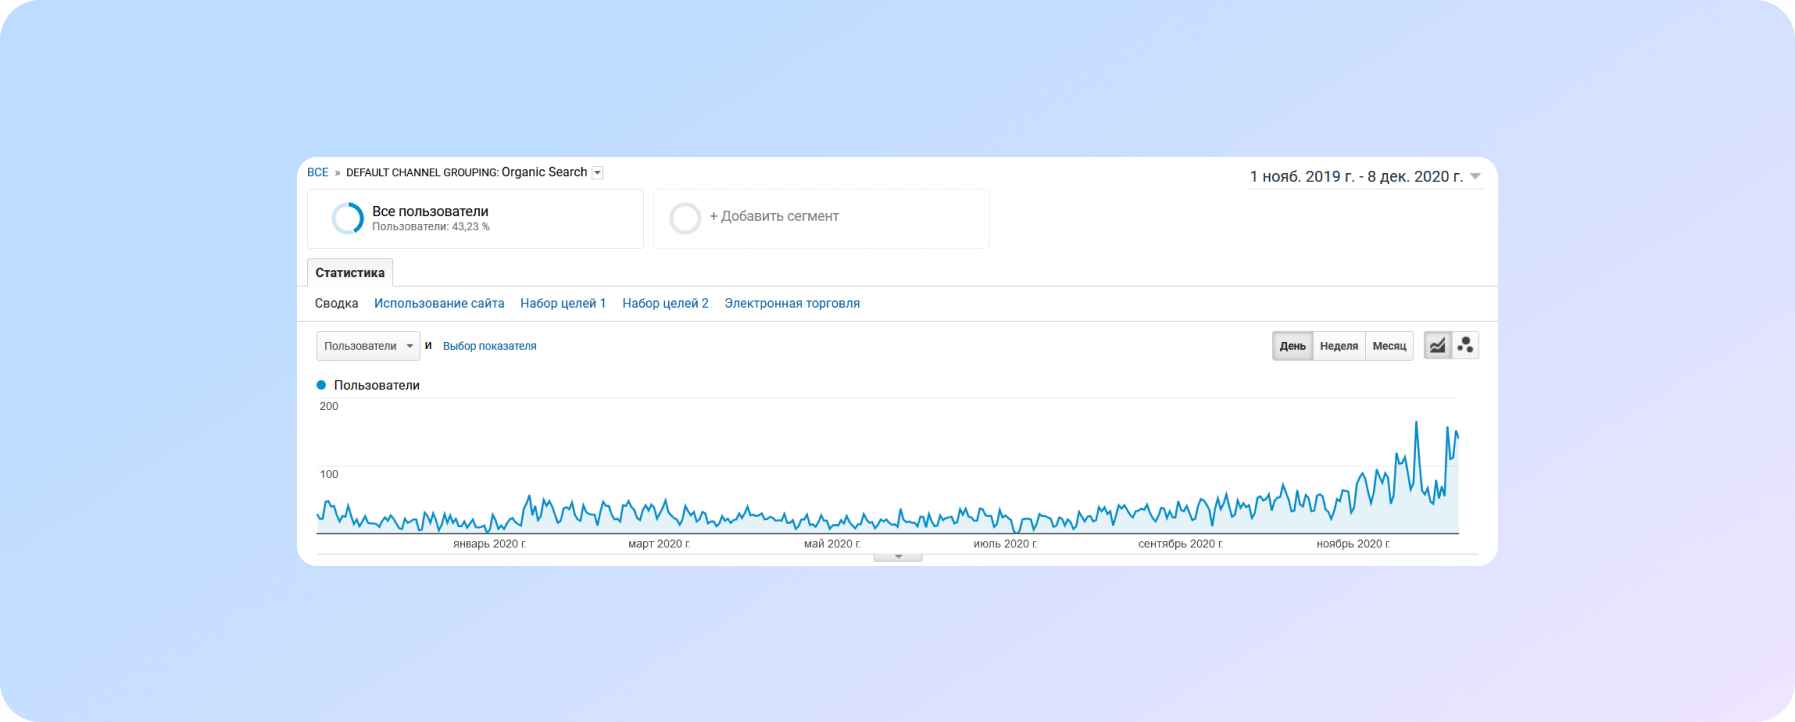 Growth in organic traffic after updating the site to adaptive